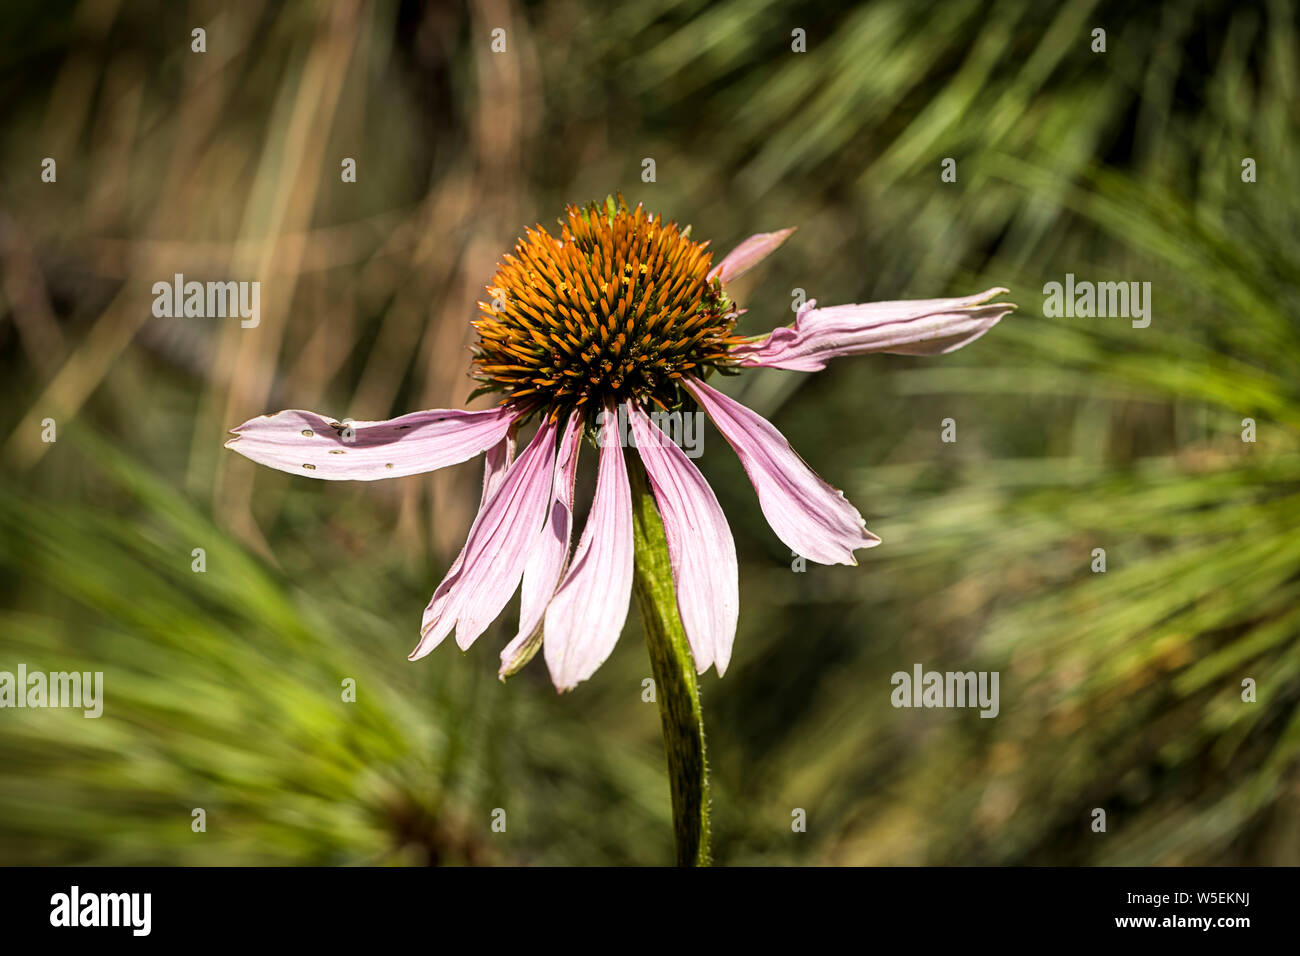 A close up photo of a delicate purple coneflower in a garden. Stock Photo